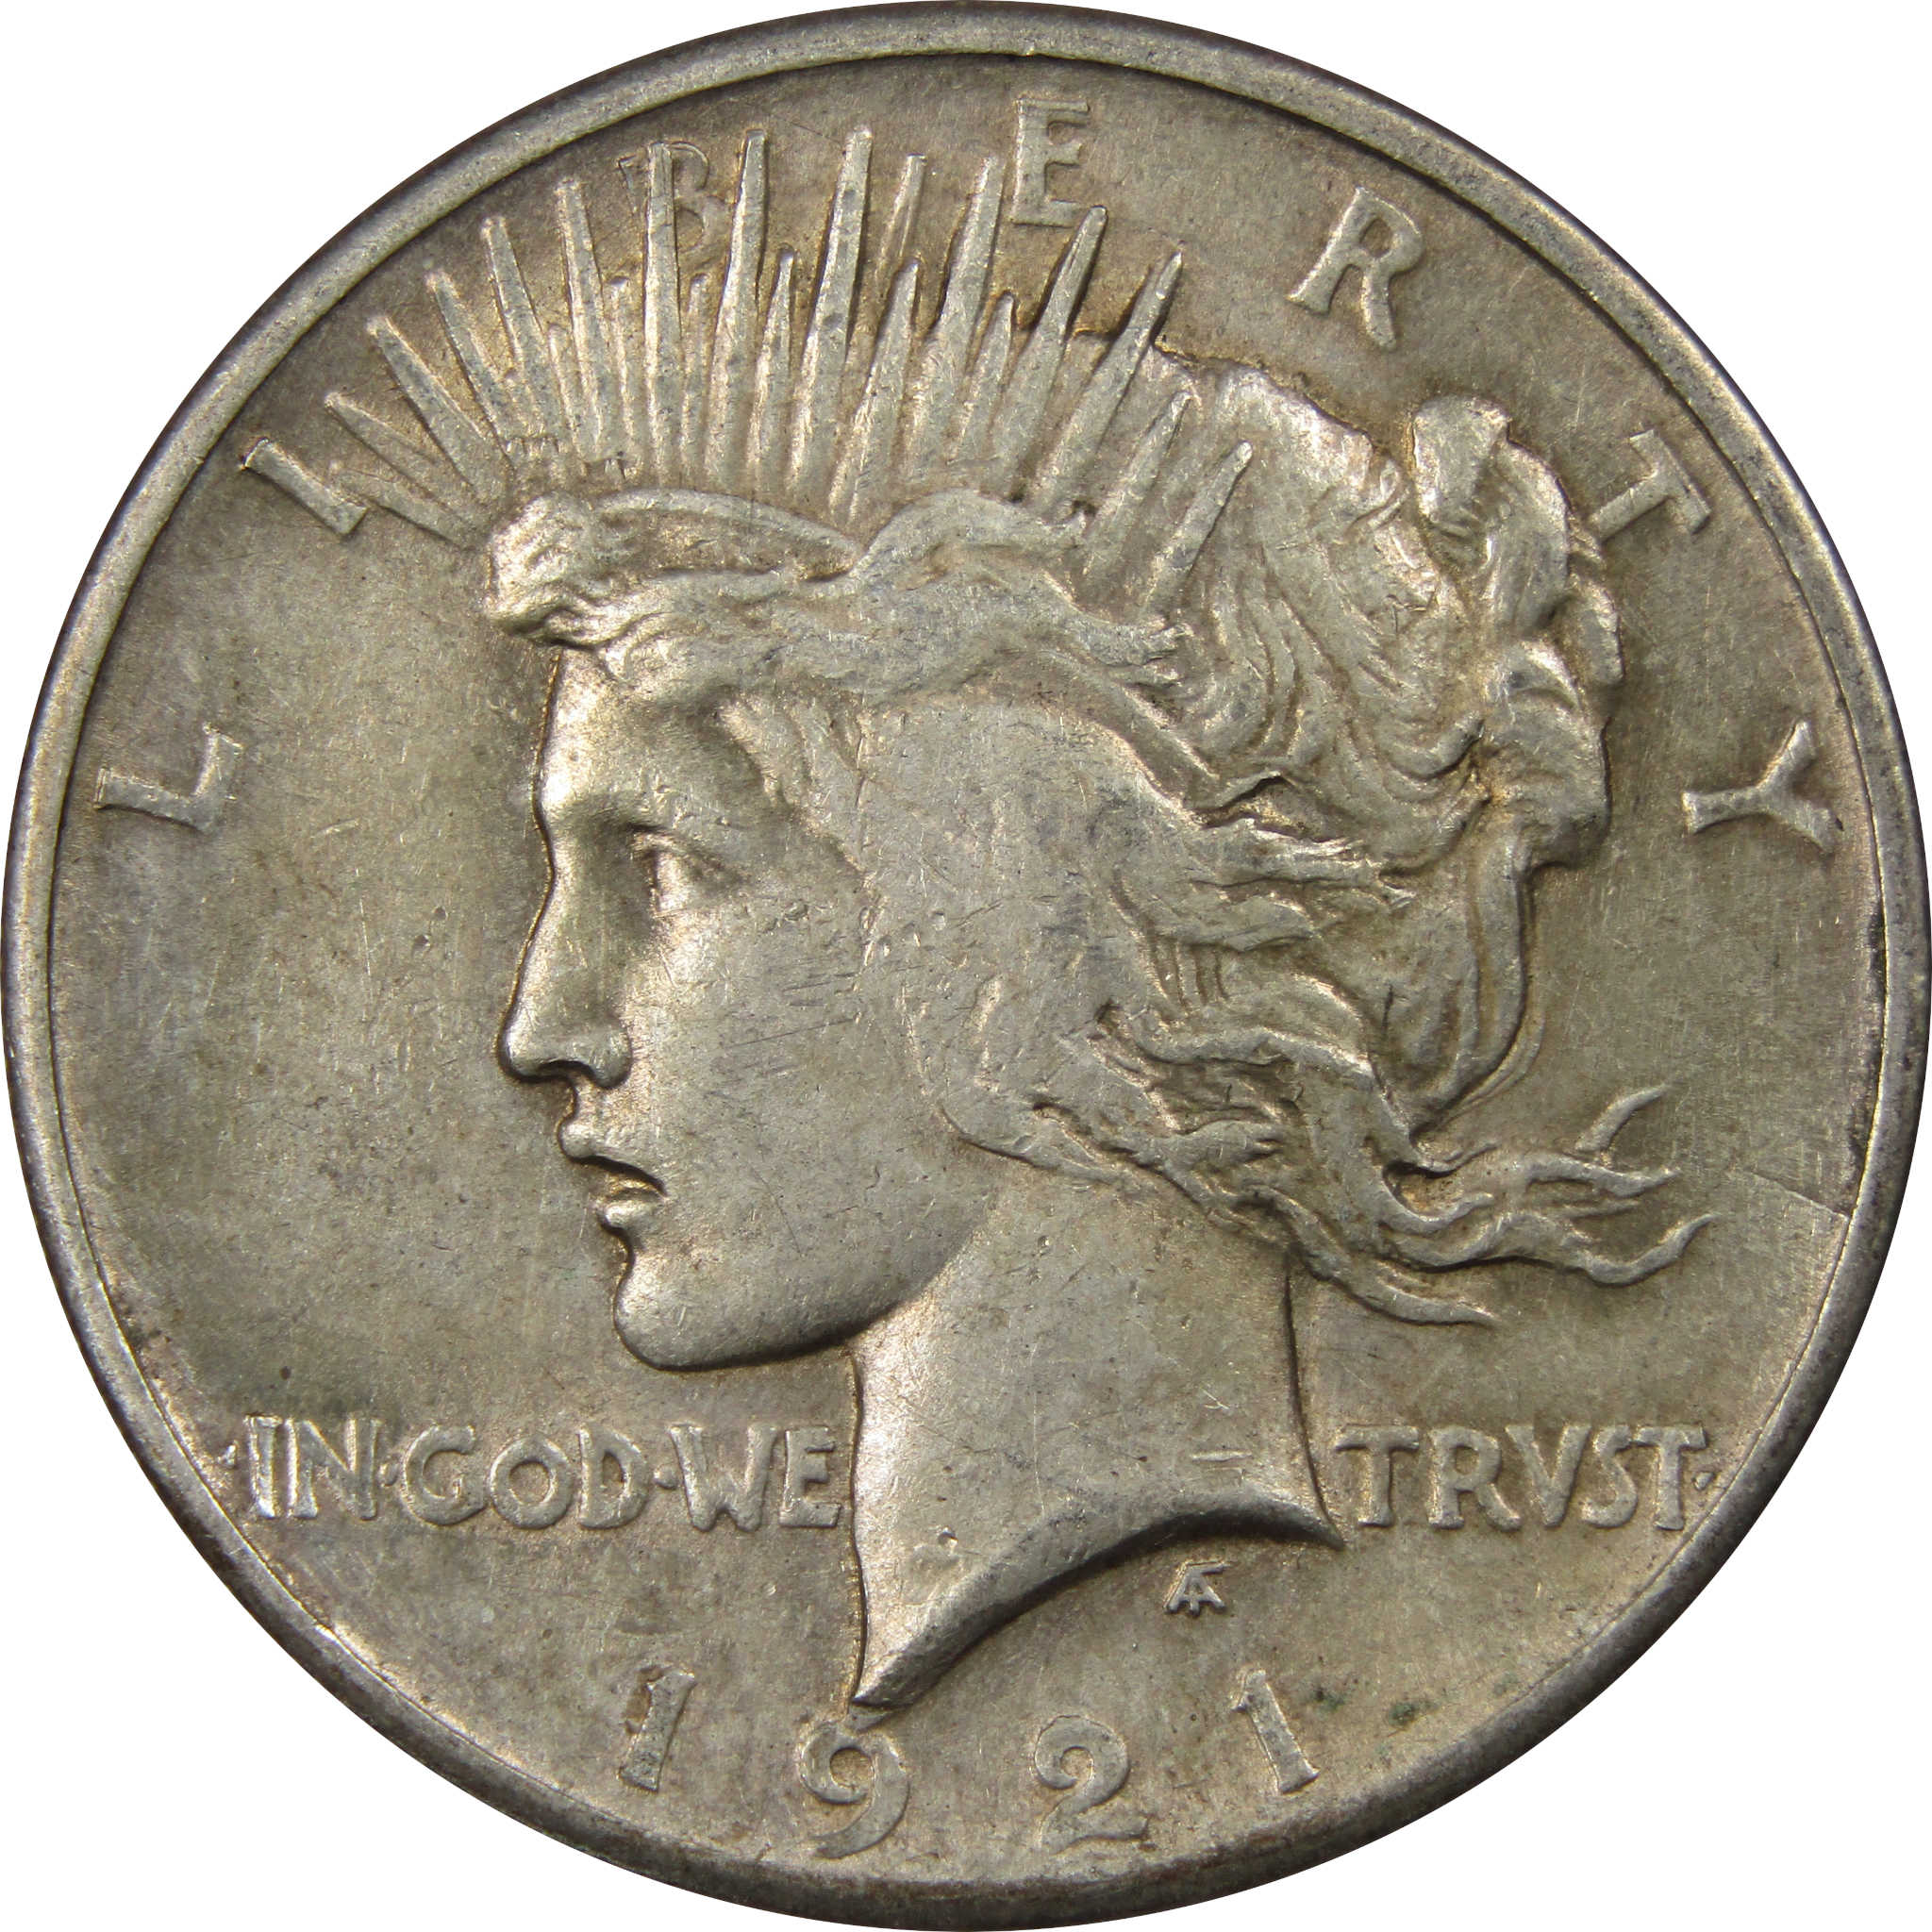 1921 High Relief Peace Dollar XF EF Extremely Fine Silver $1 SKU:I1154